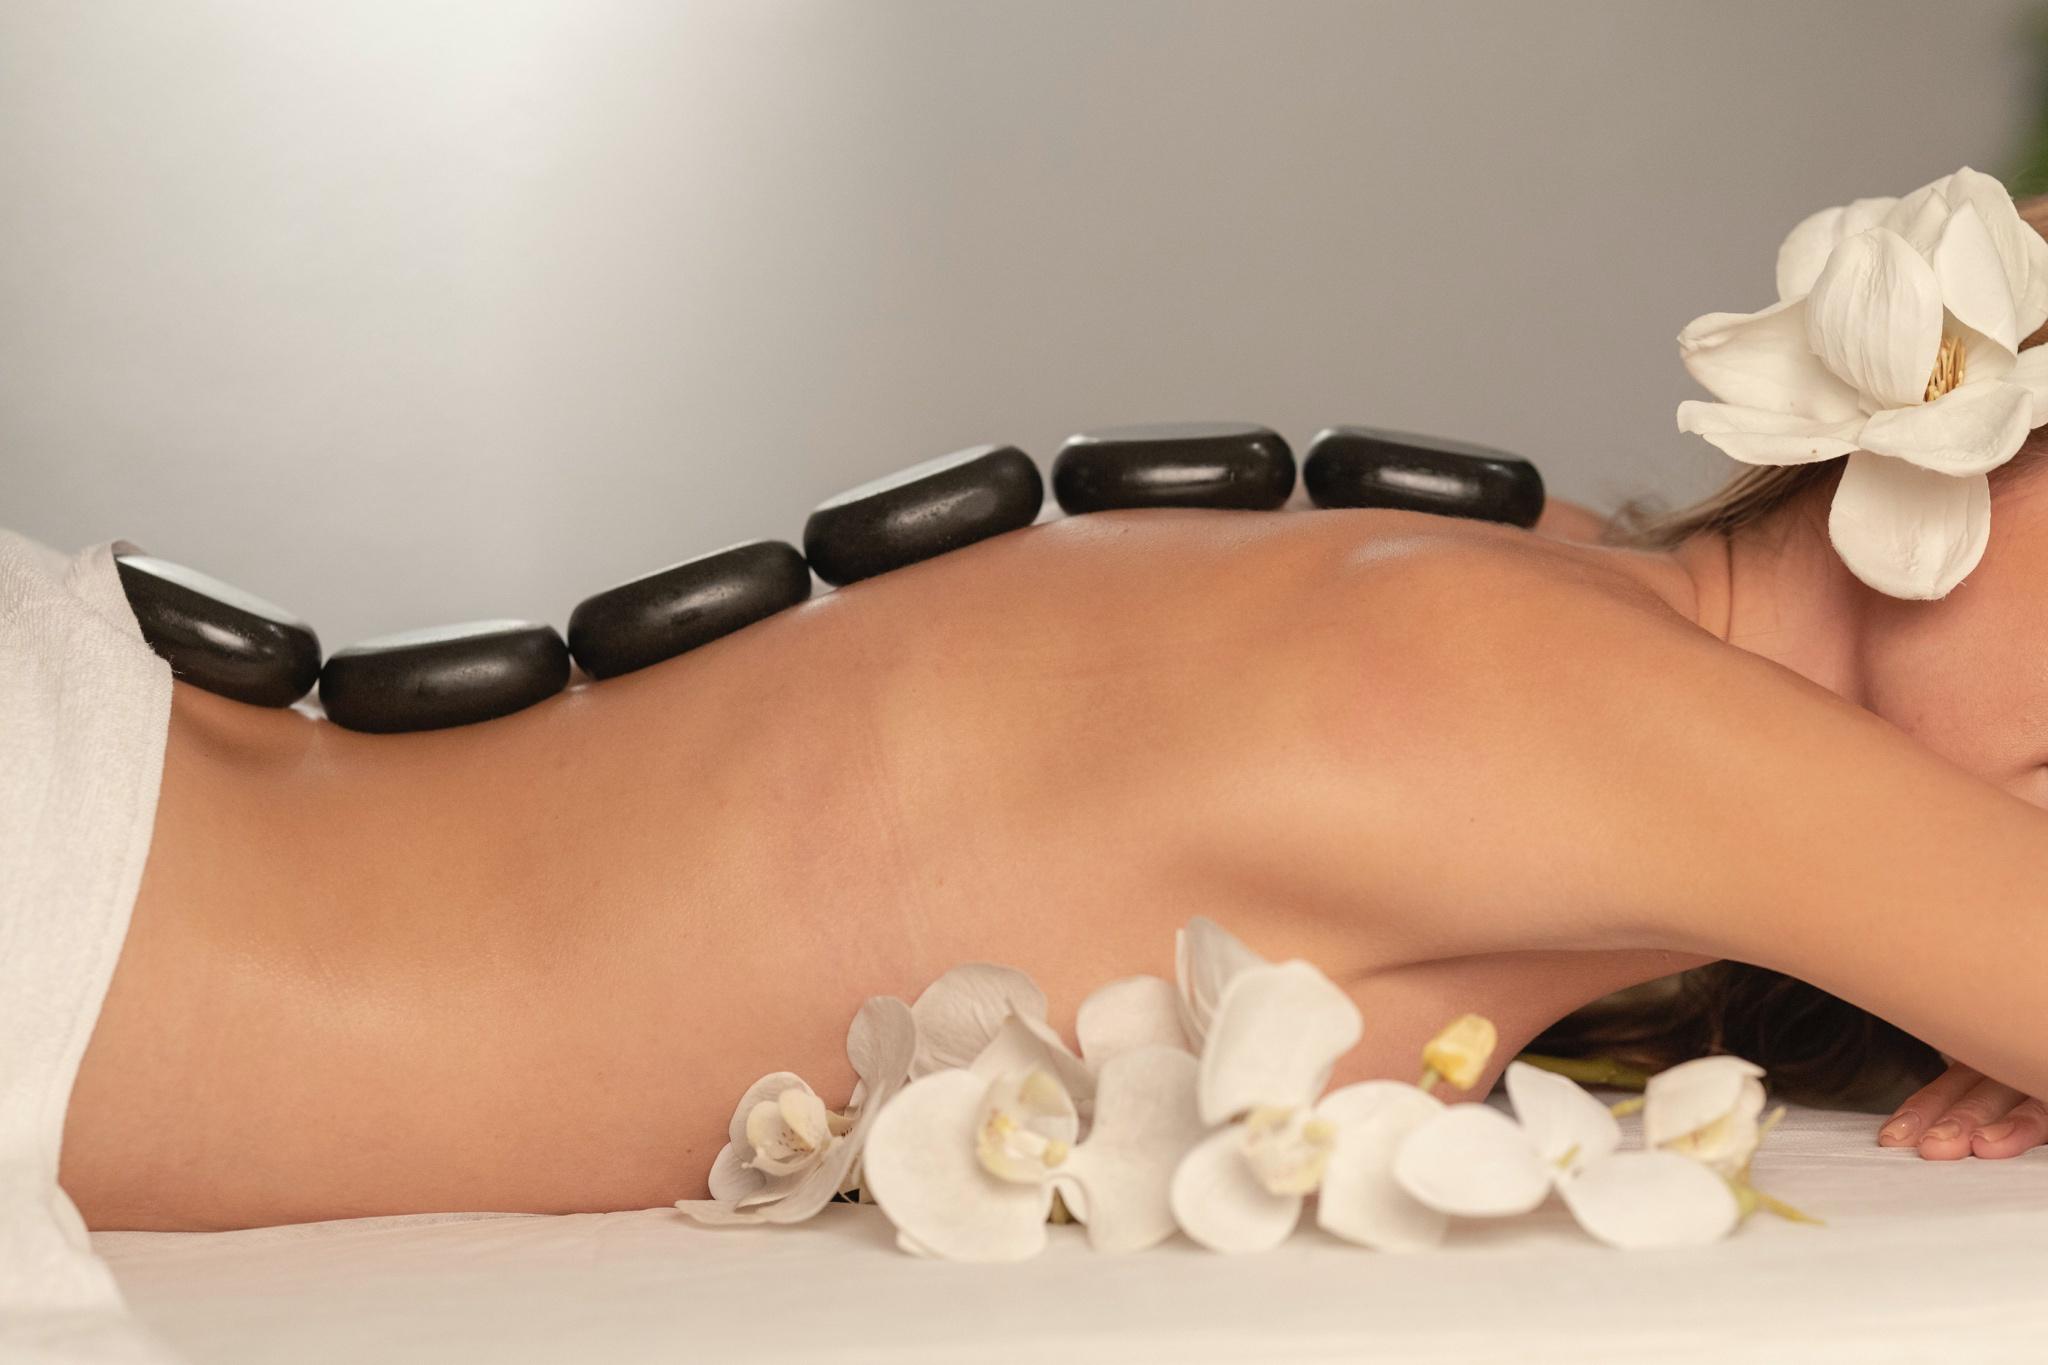 How Does Hot Stone Massage Work?